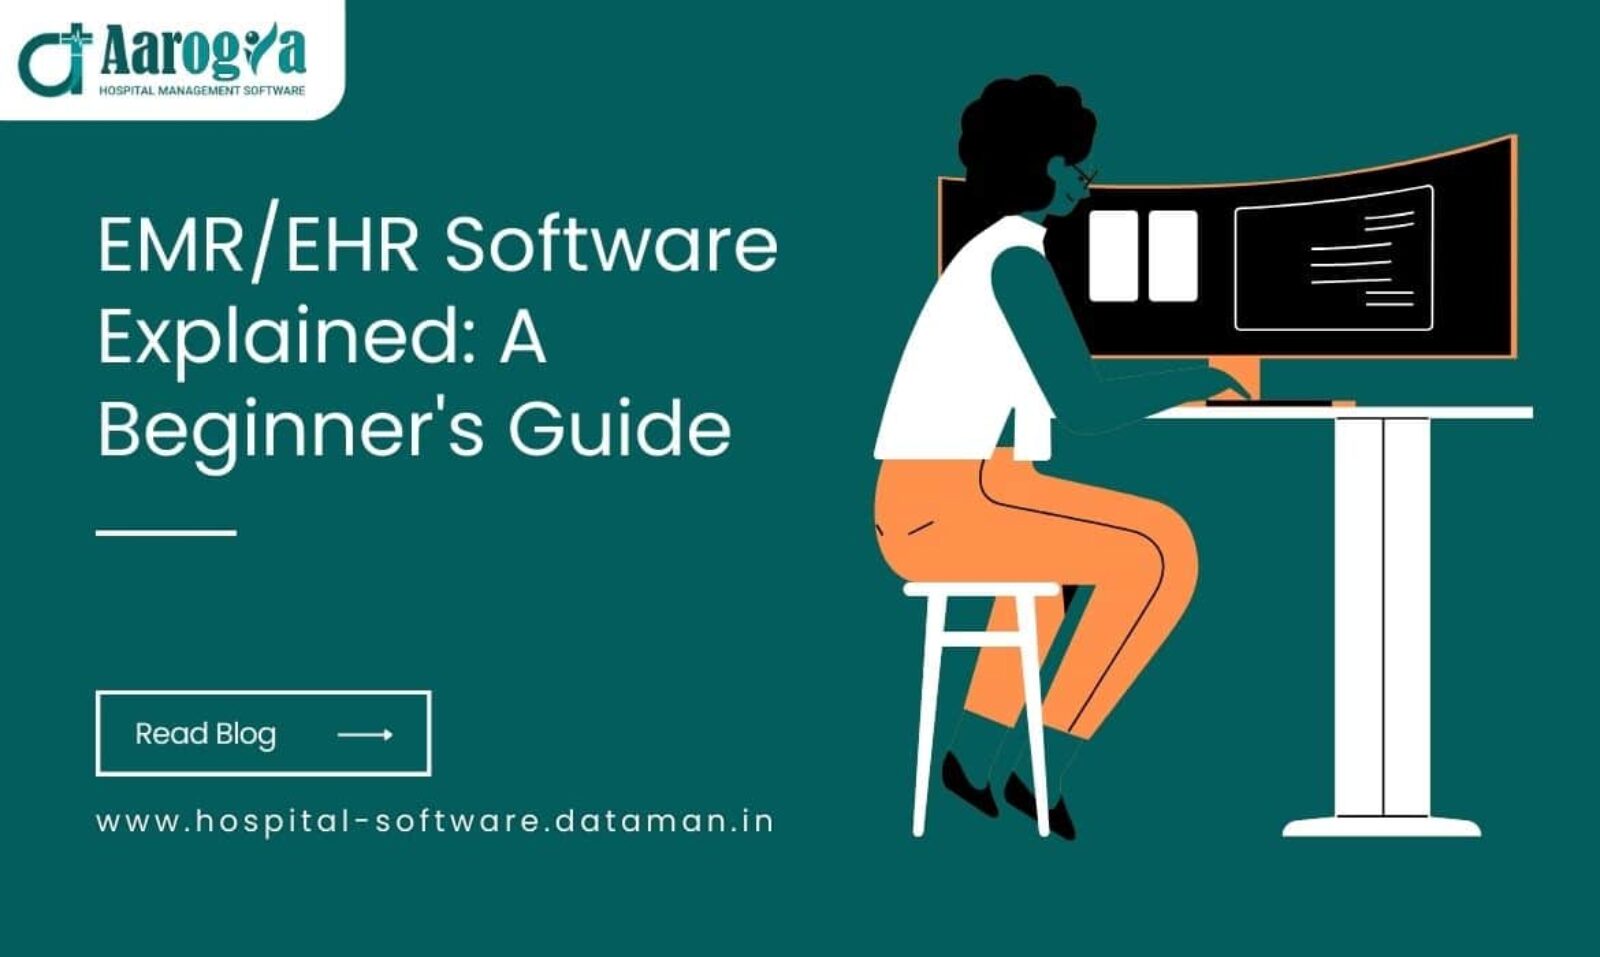 EMR software and EHR Software Explained- A Beginner's Guide